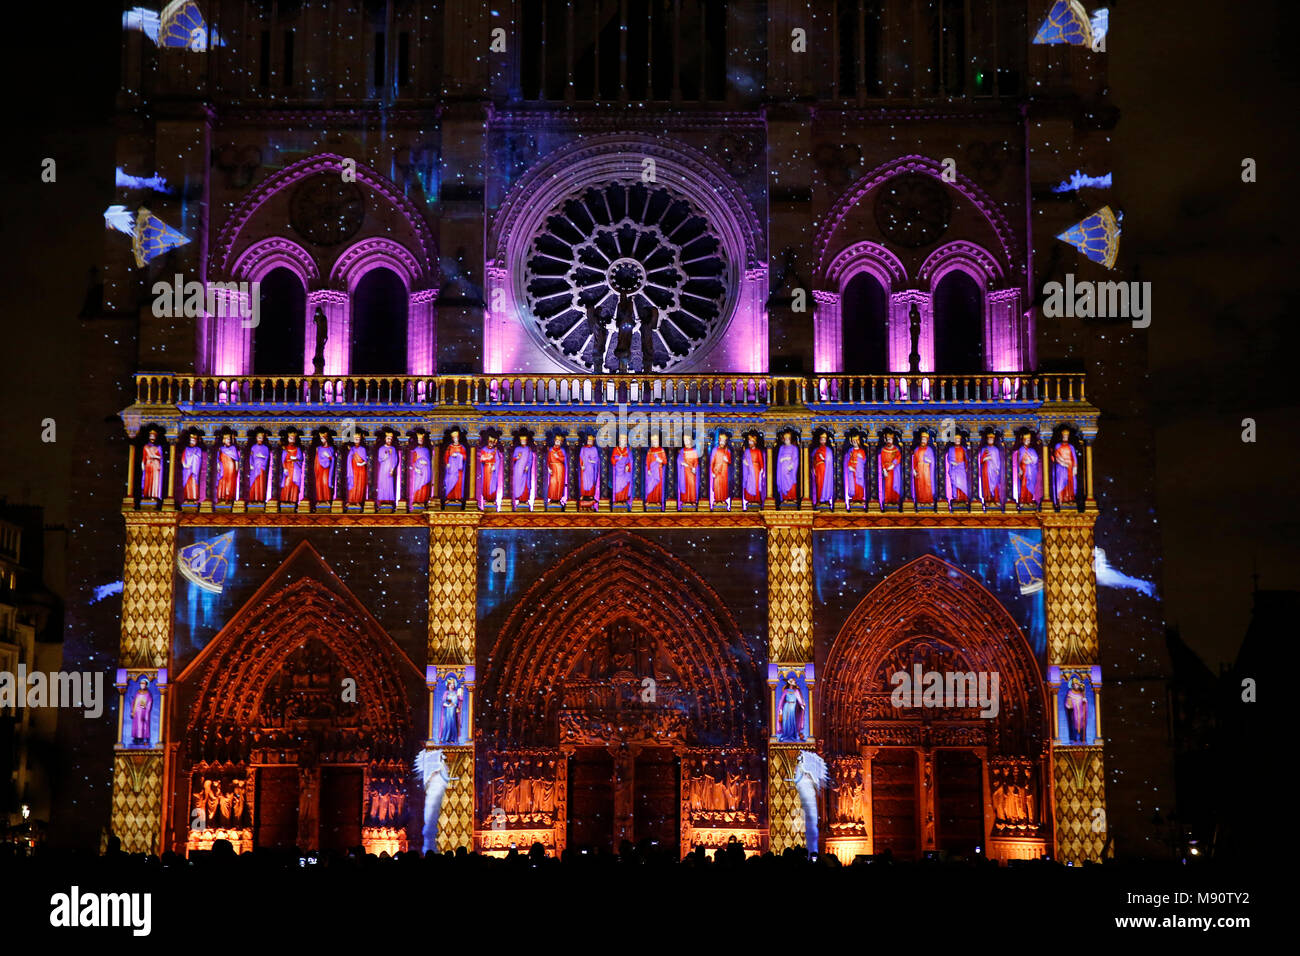 Sound and light show at Notre Dame de Paris cathedral, France. Stock Photo